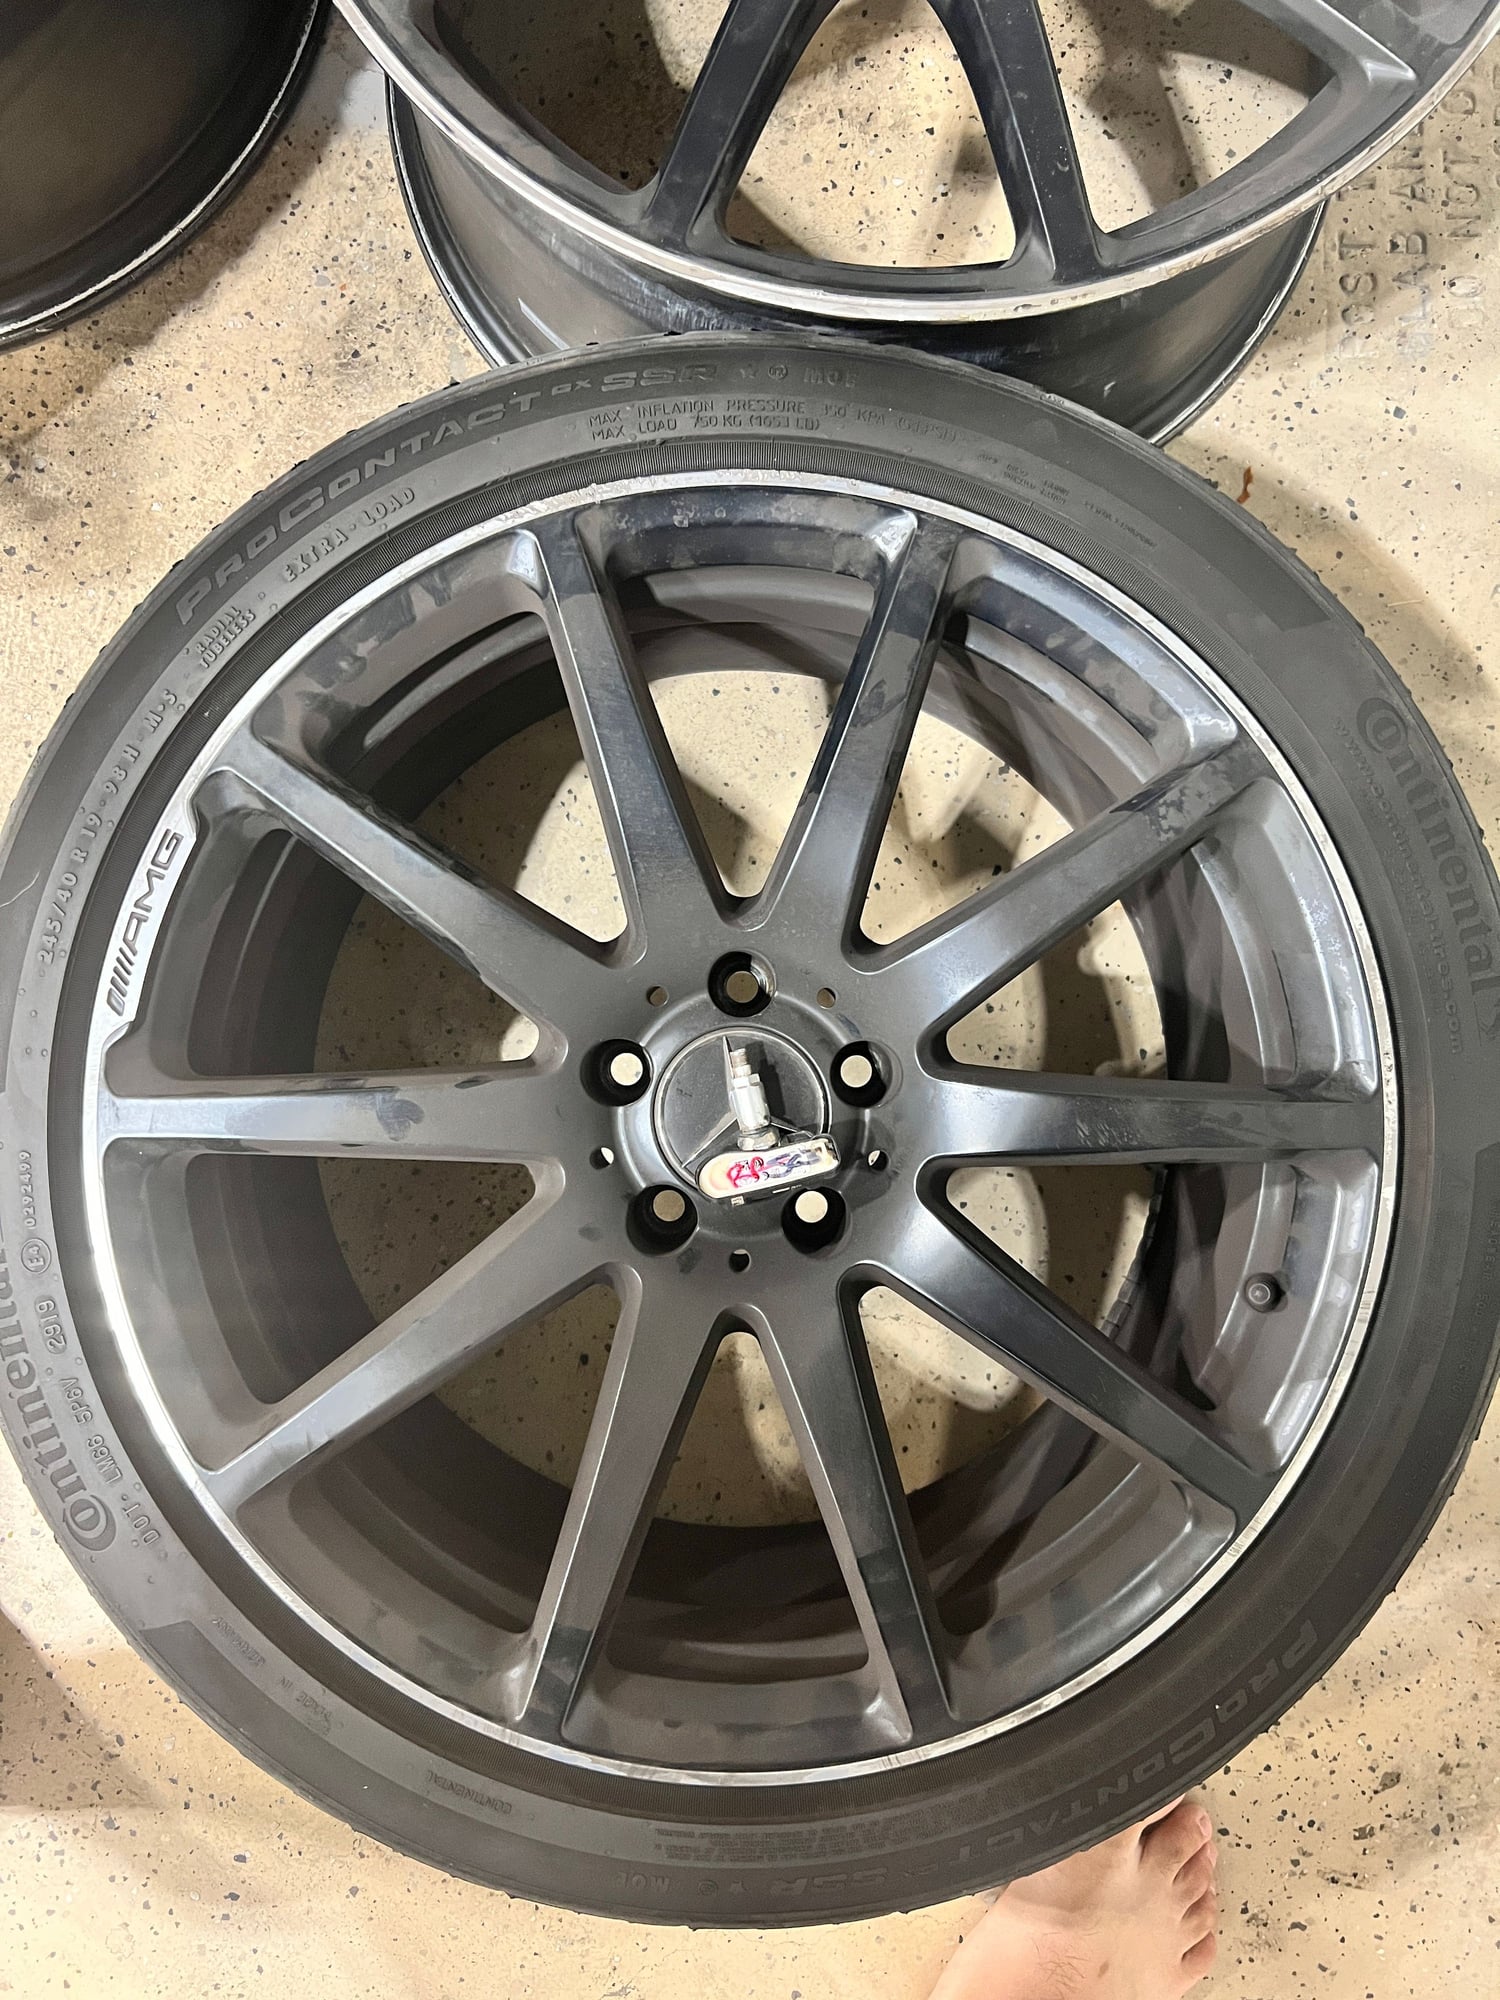 Wheels and Tires/Axles - Sl63 amg wheels - Used - 0  All Models - Dublin, CA 94568, United States